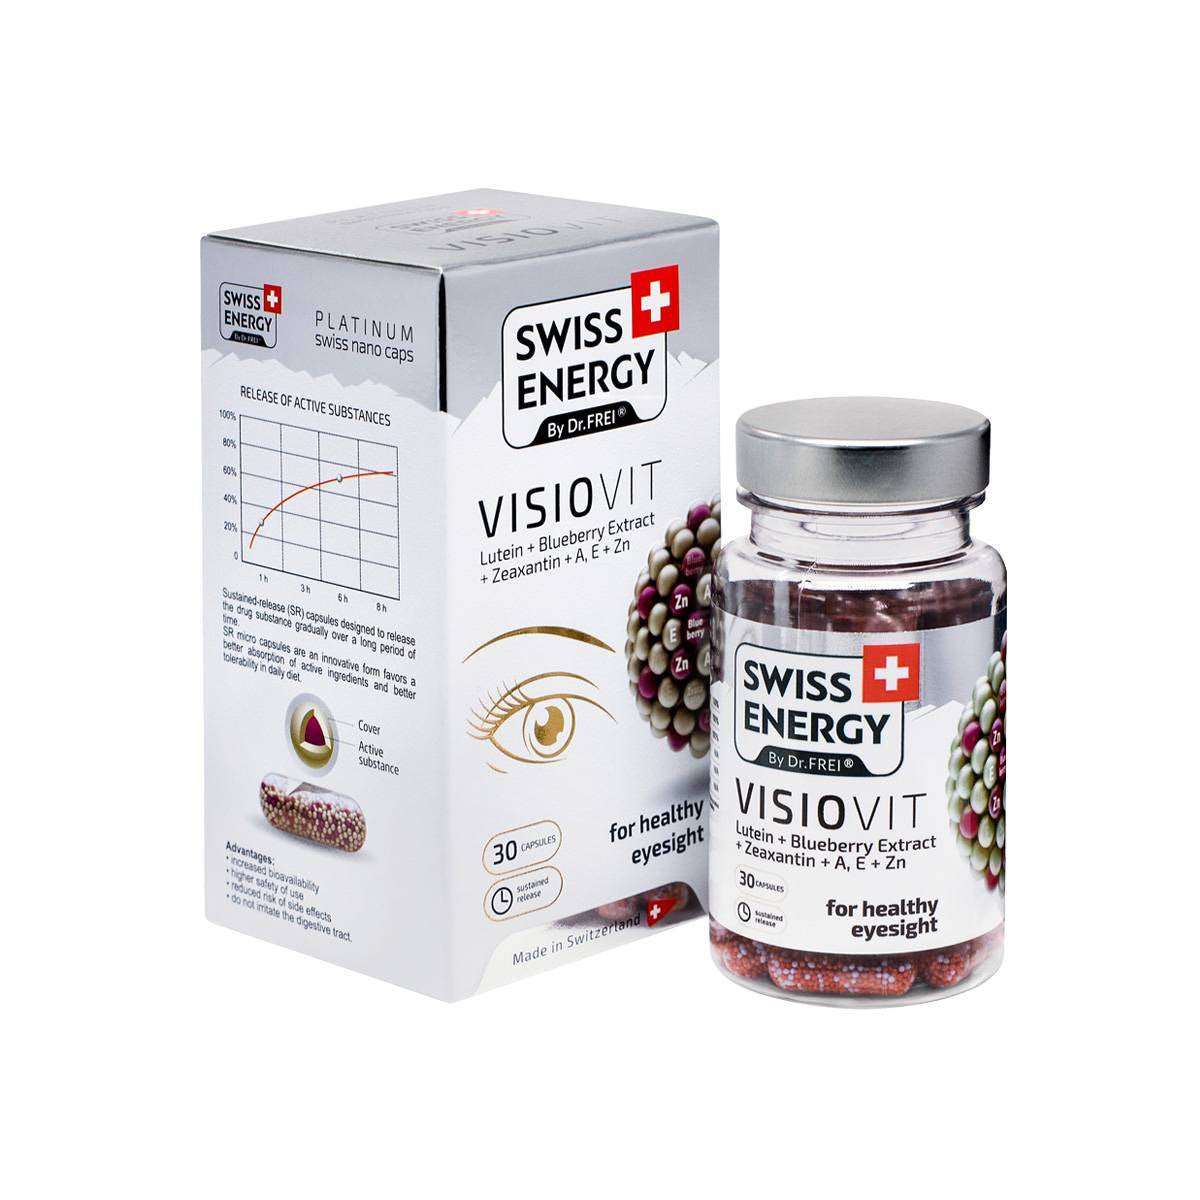 VISIOVIT (Lutein + Blueberry extract) - for healthy vision - 30 sustained-release capsules